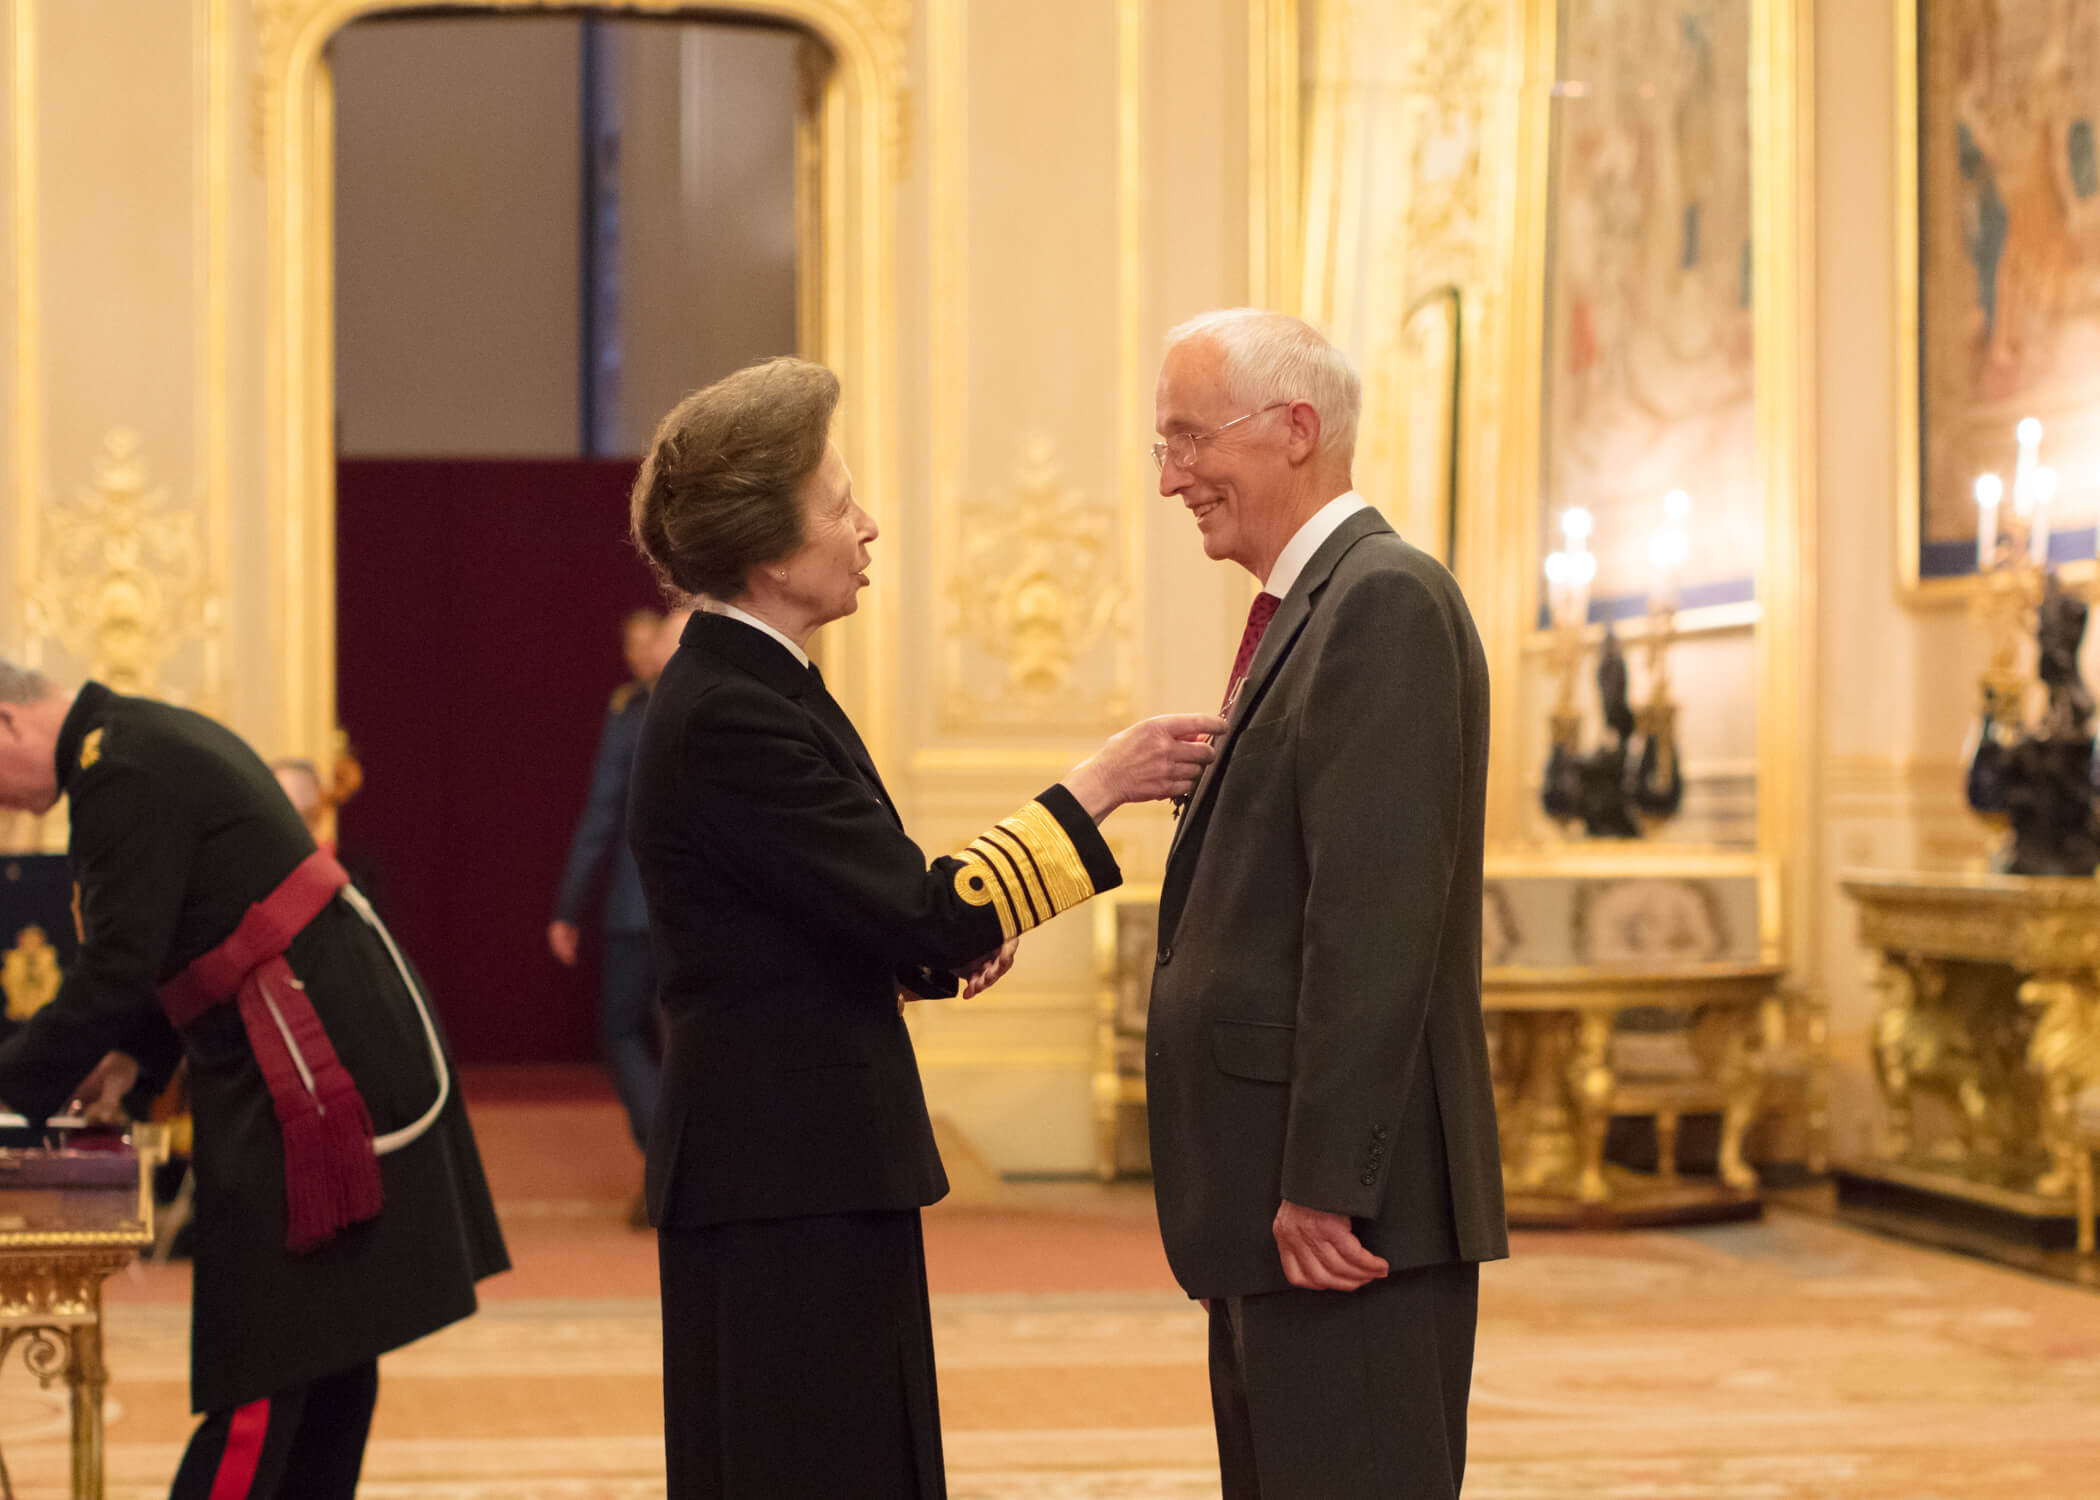 Volunteer, Martin Phillips MBE, honoured with award from The Princess Royal